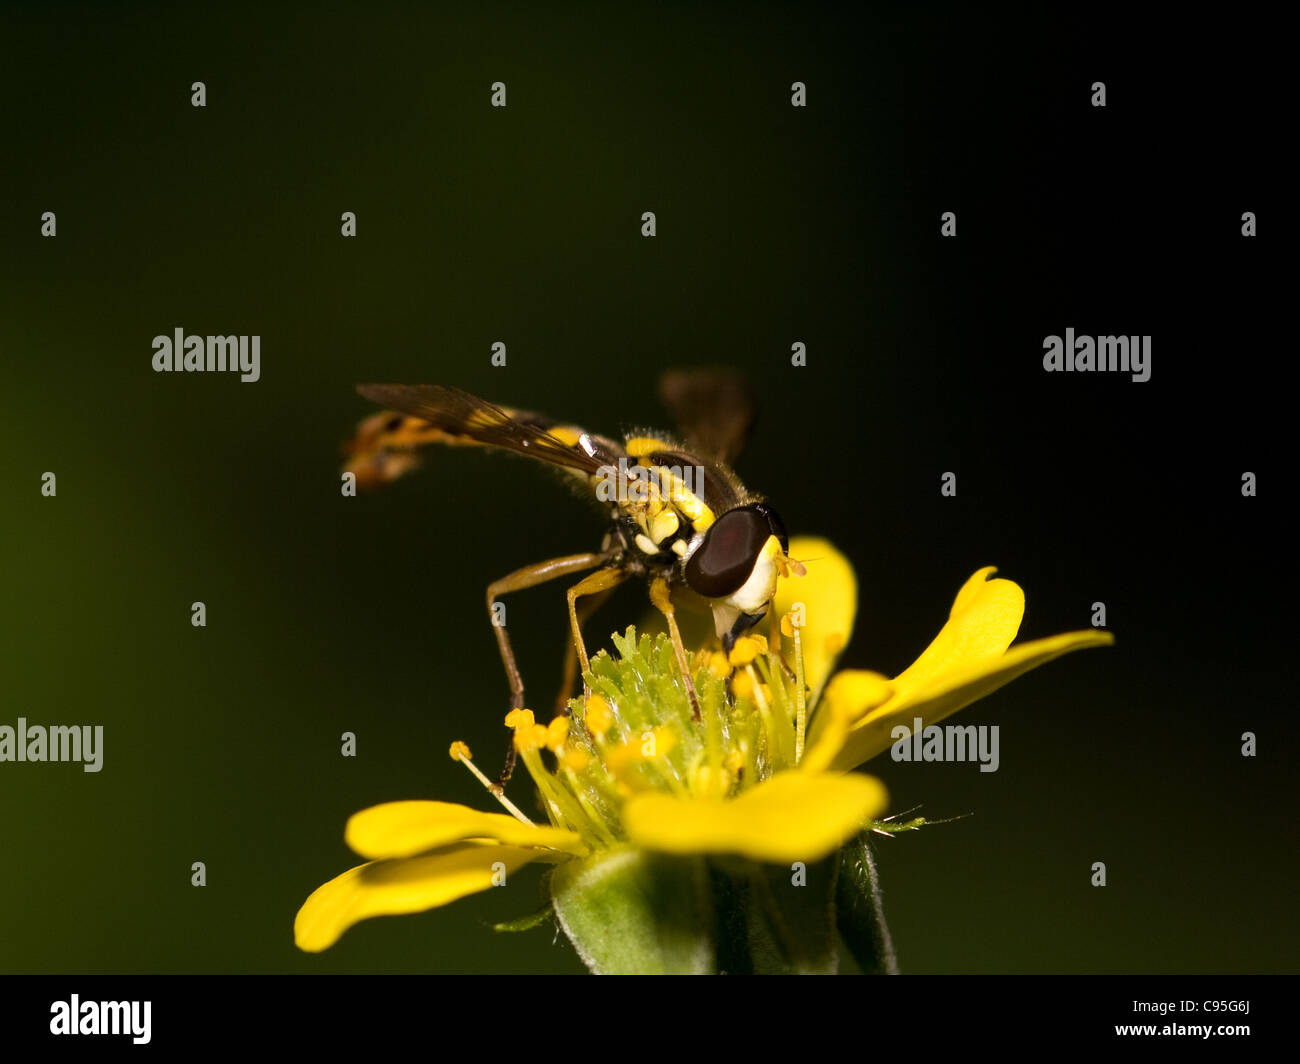 Common howerfly, Syrphus ribesii, eating pollen in a yellow flower. Stock Photo